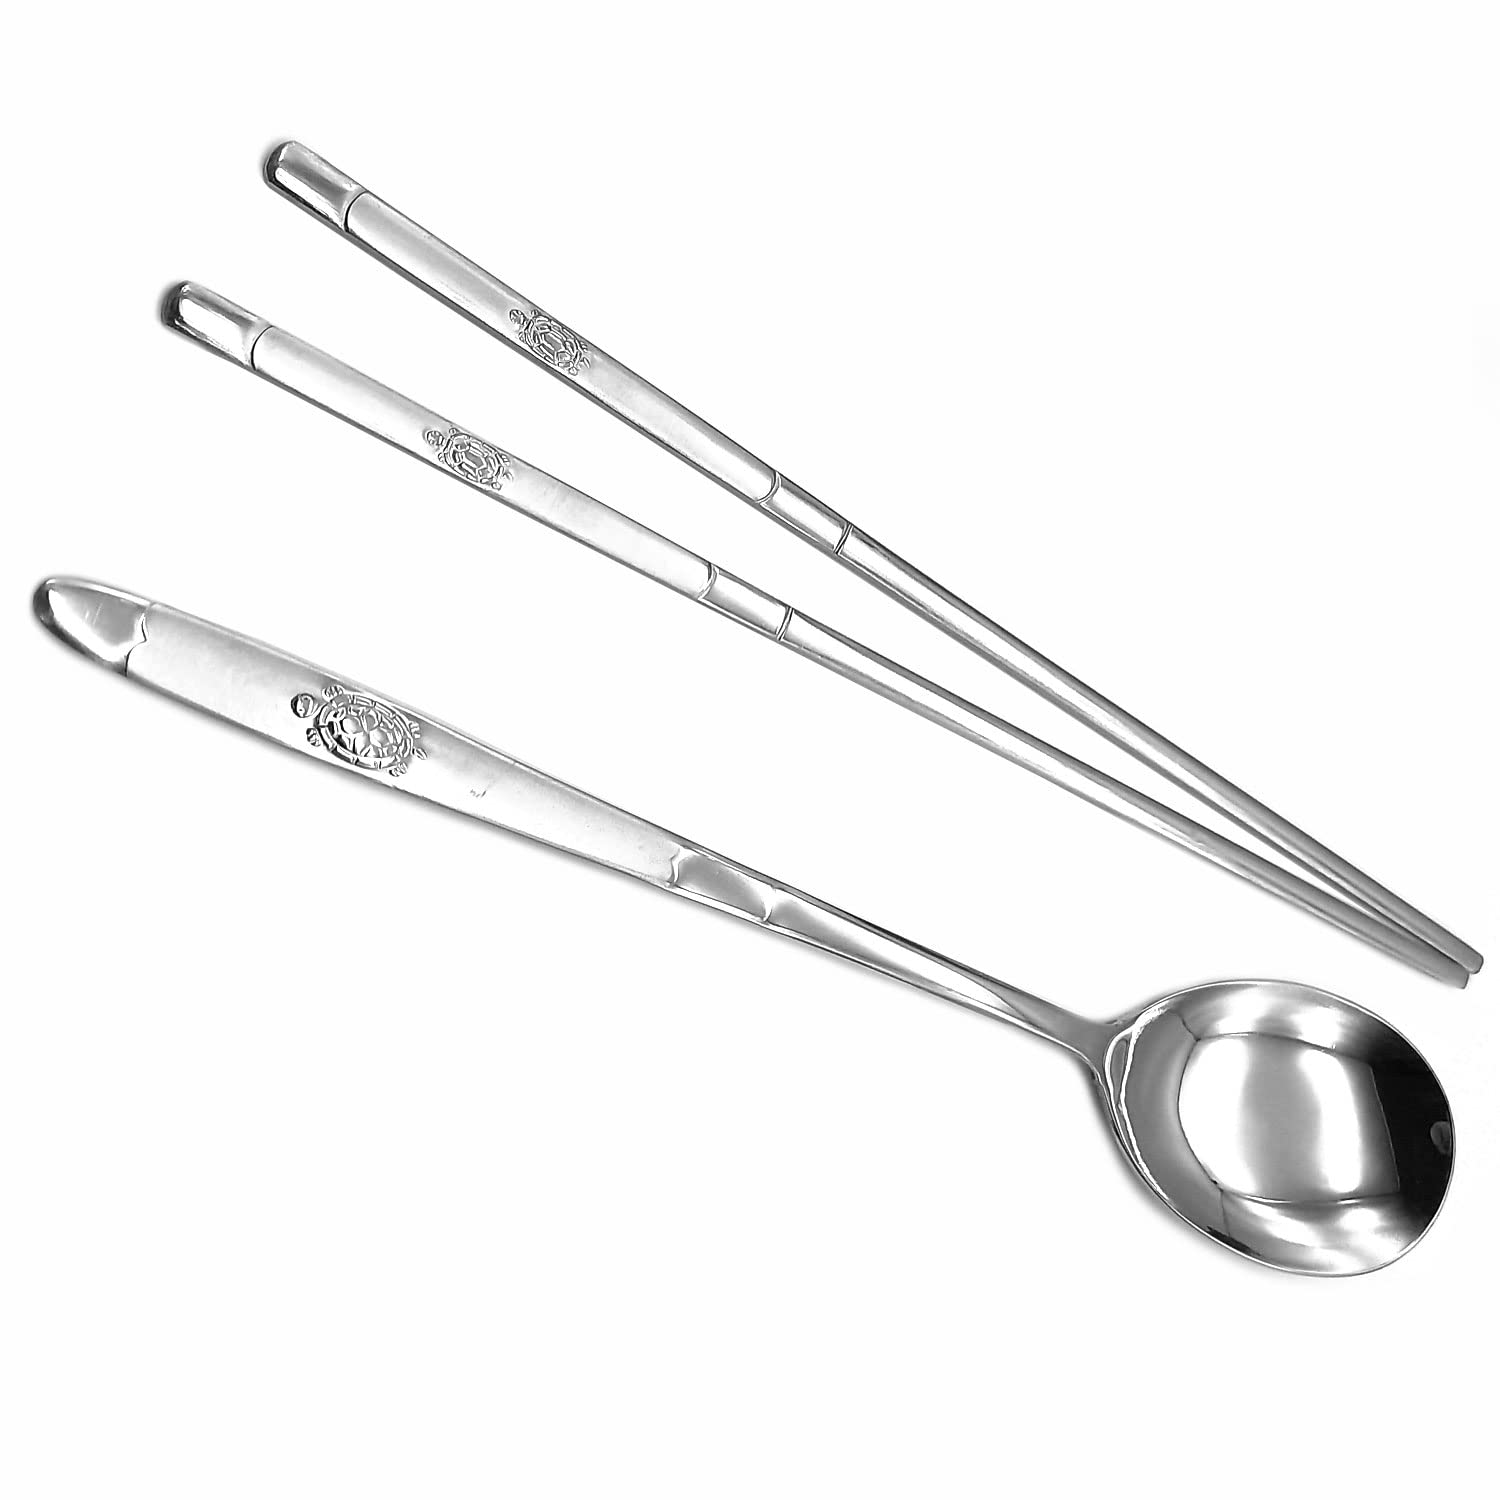 SUPIA Korean Traditional Cutlery Stainless Steel Spoons and Chopsticks Set Tableware with Long-hand, Reusable (Silver Turtle)